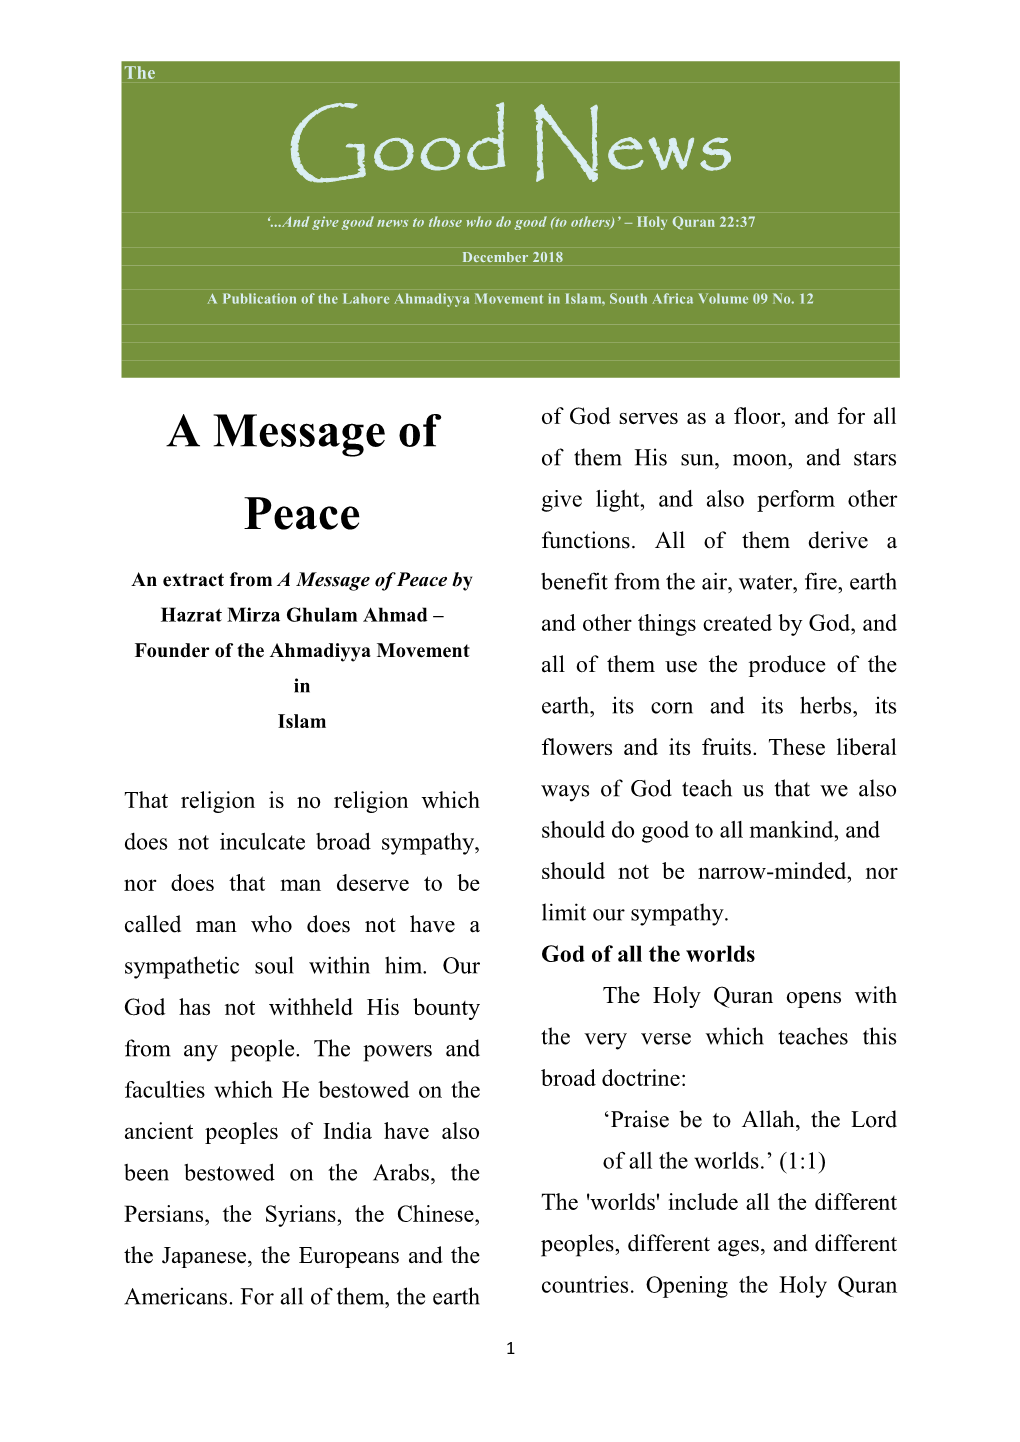 December 2018: Message of Peace